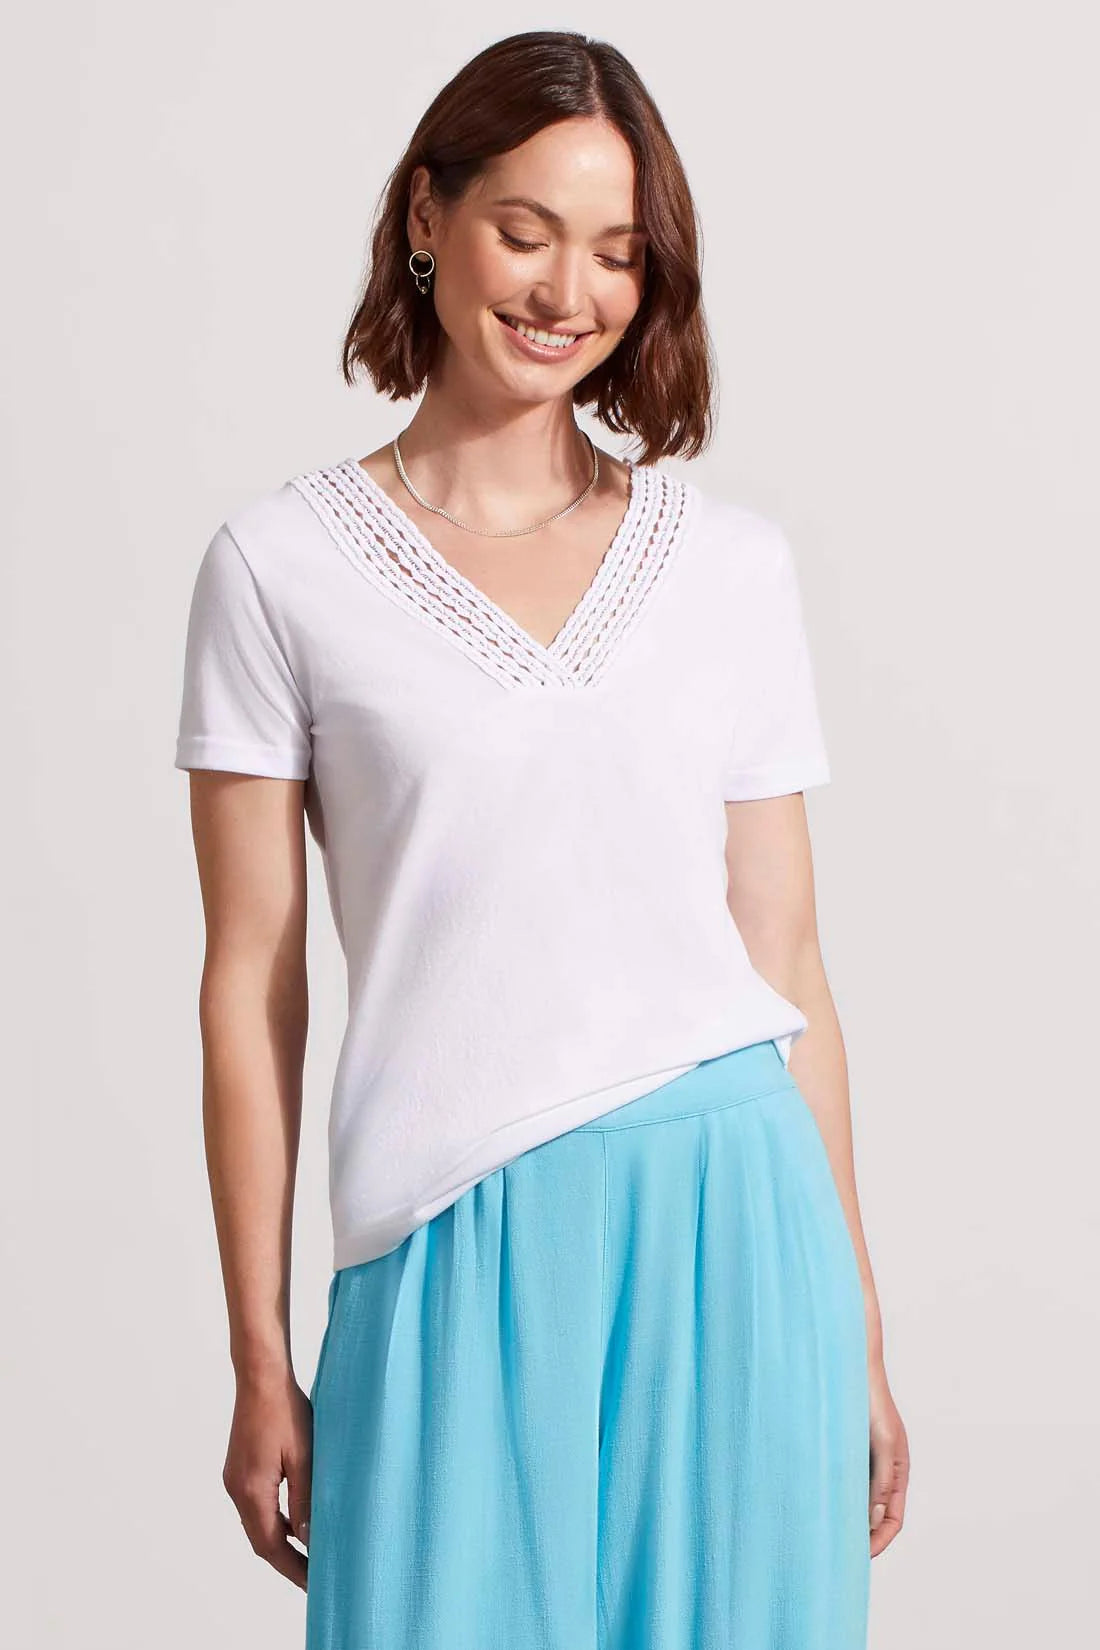 Not your average tee. This short-sleeve top makes a stylish impact with a v-neck outlined in color-coordinated crochet trim. The slub knit fabric is so soft you'll be wearing it as often as possible.